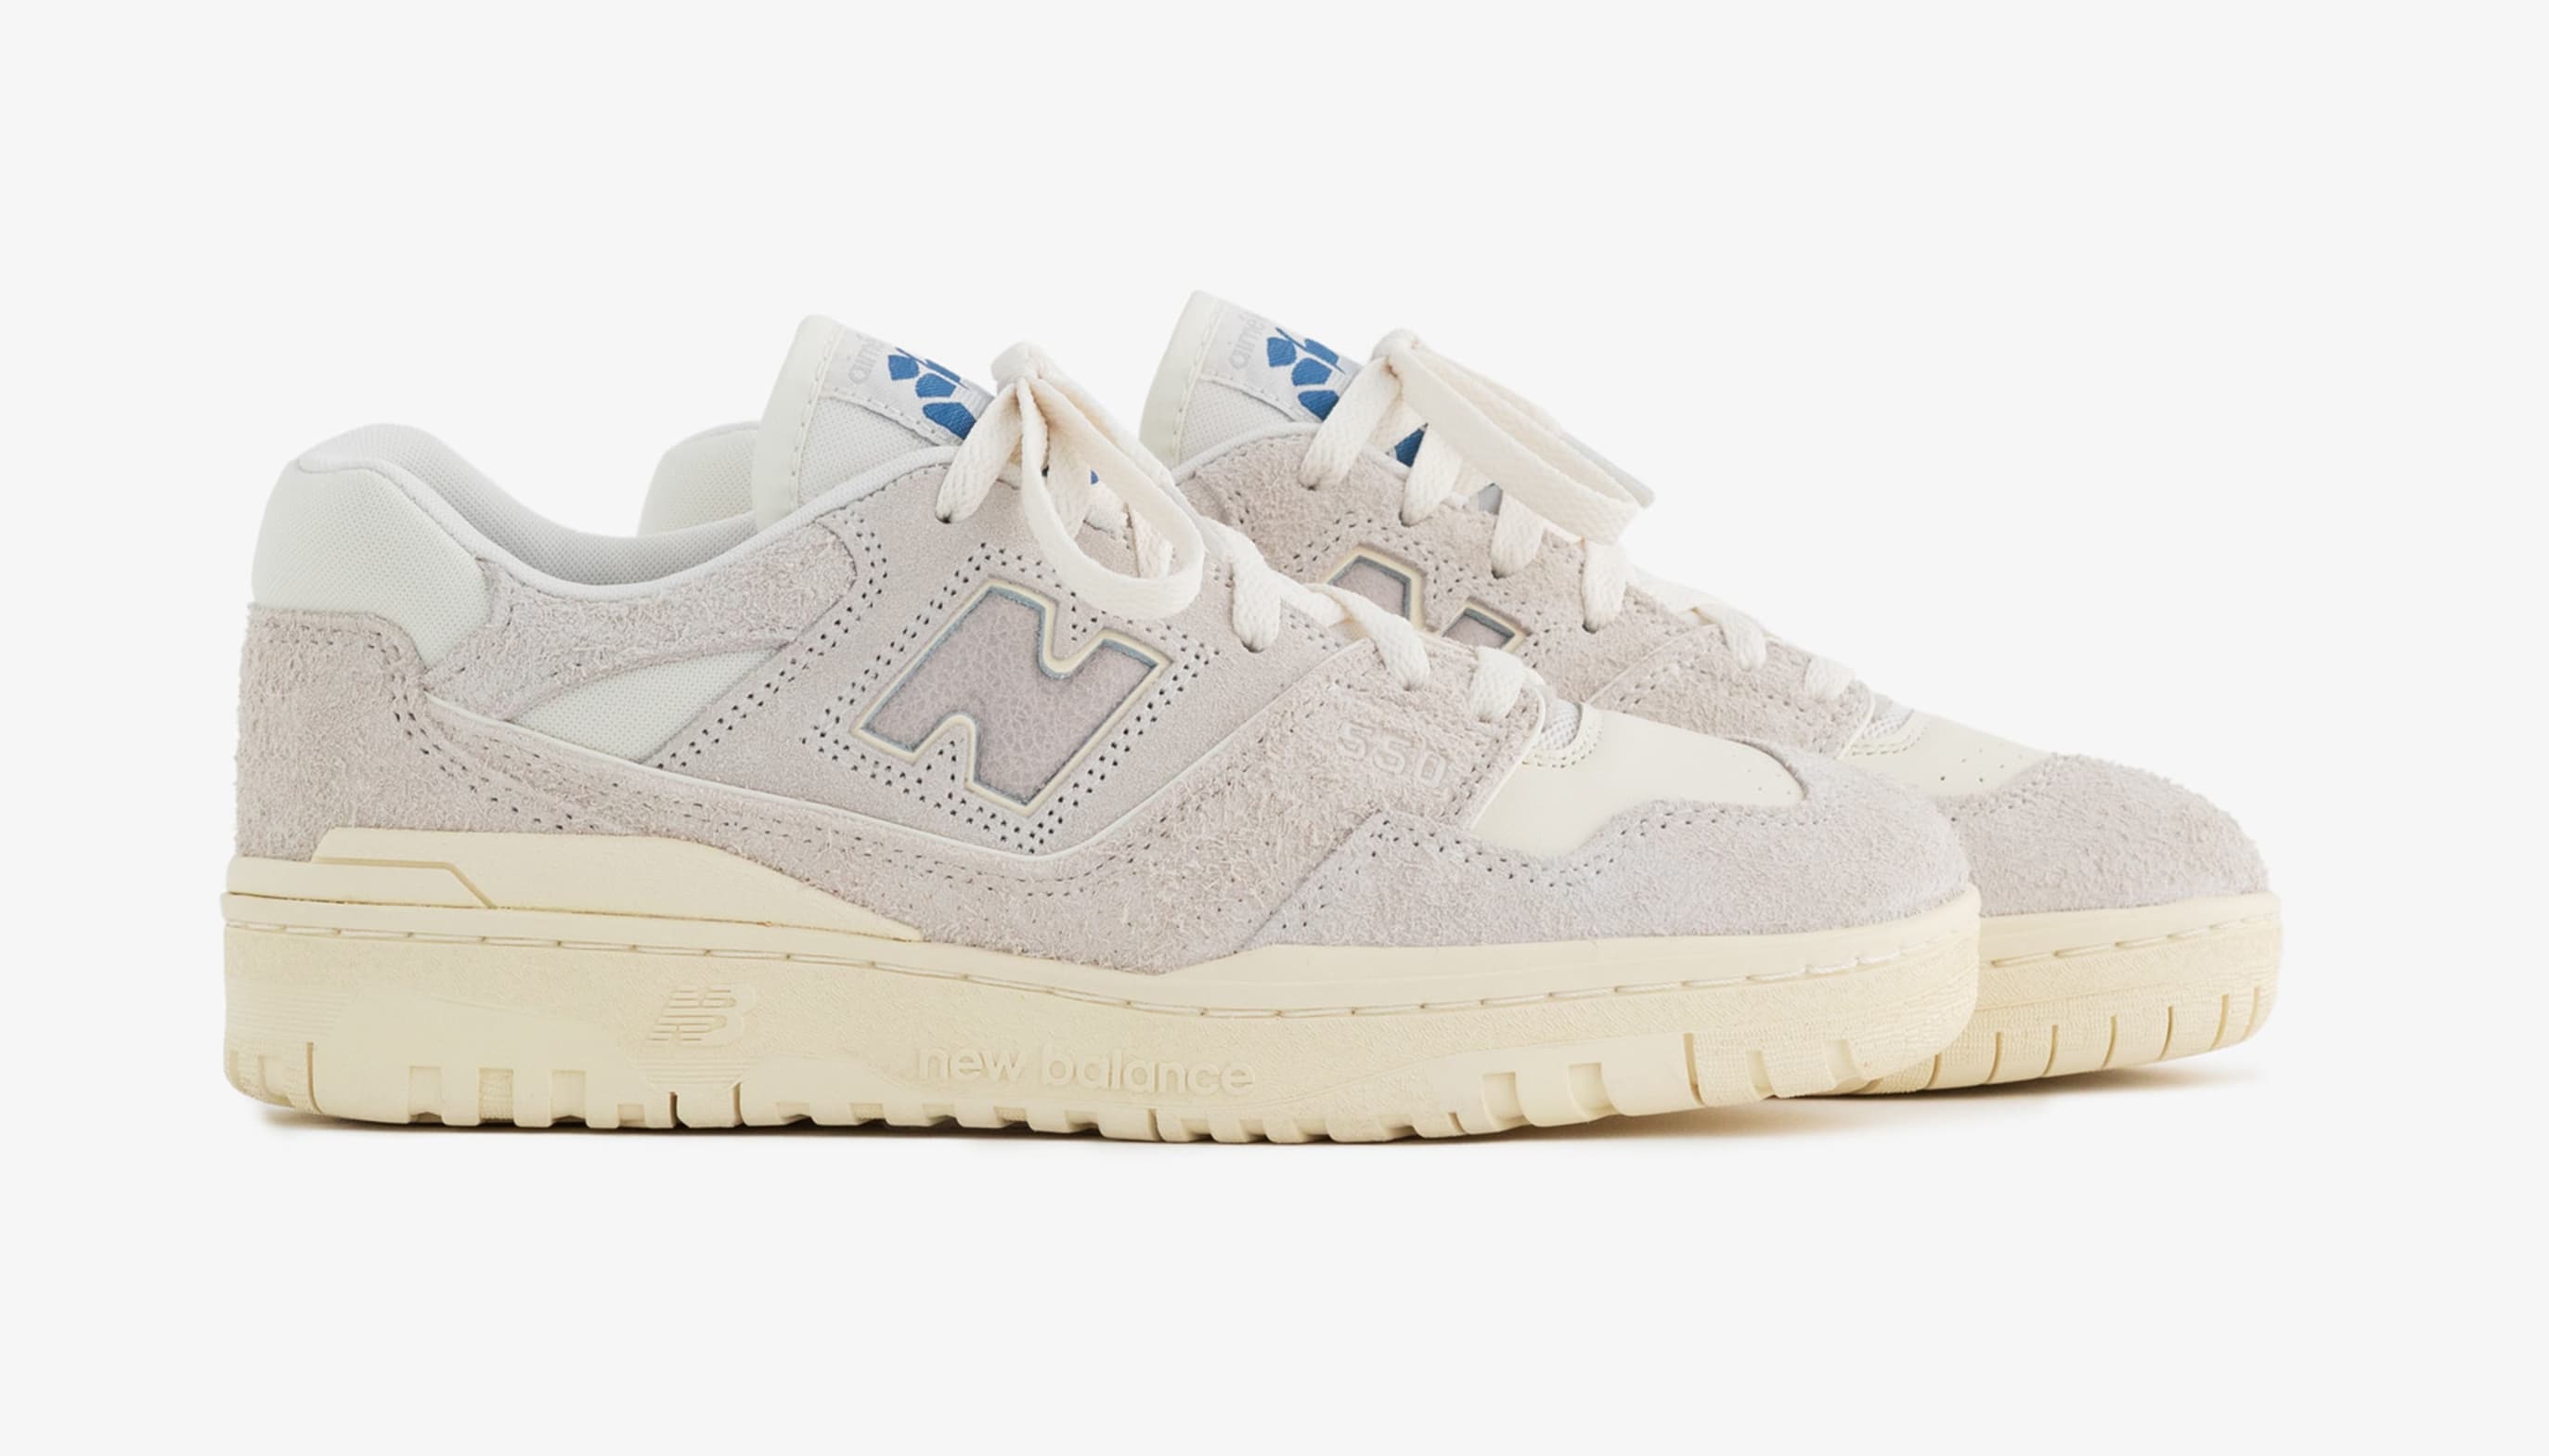 Raffle for Aime Leon Dore's Next New Balance 550 Collab Is Live